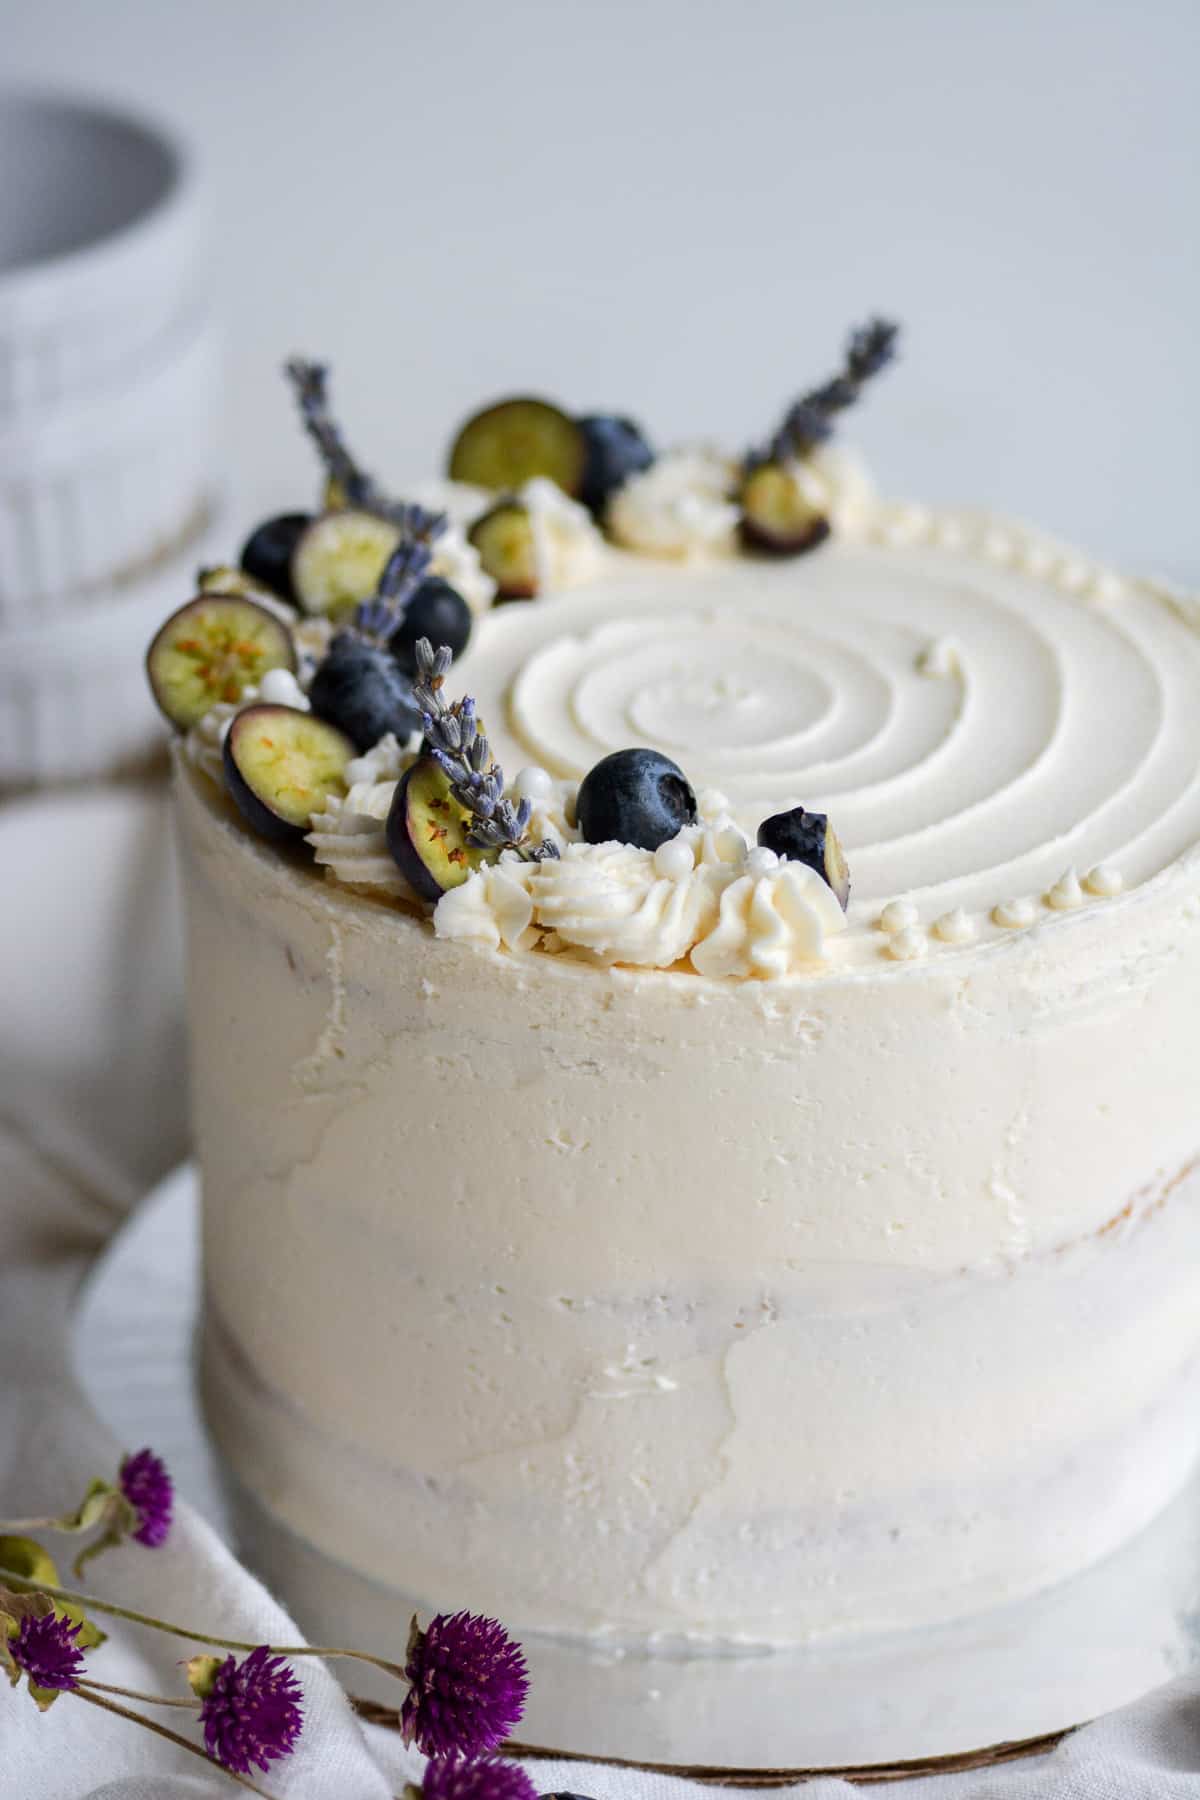 Blueberry jam cake frosted with vanilla buttercream decorate with blueberries and lavender flowers